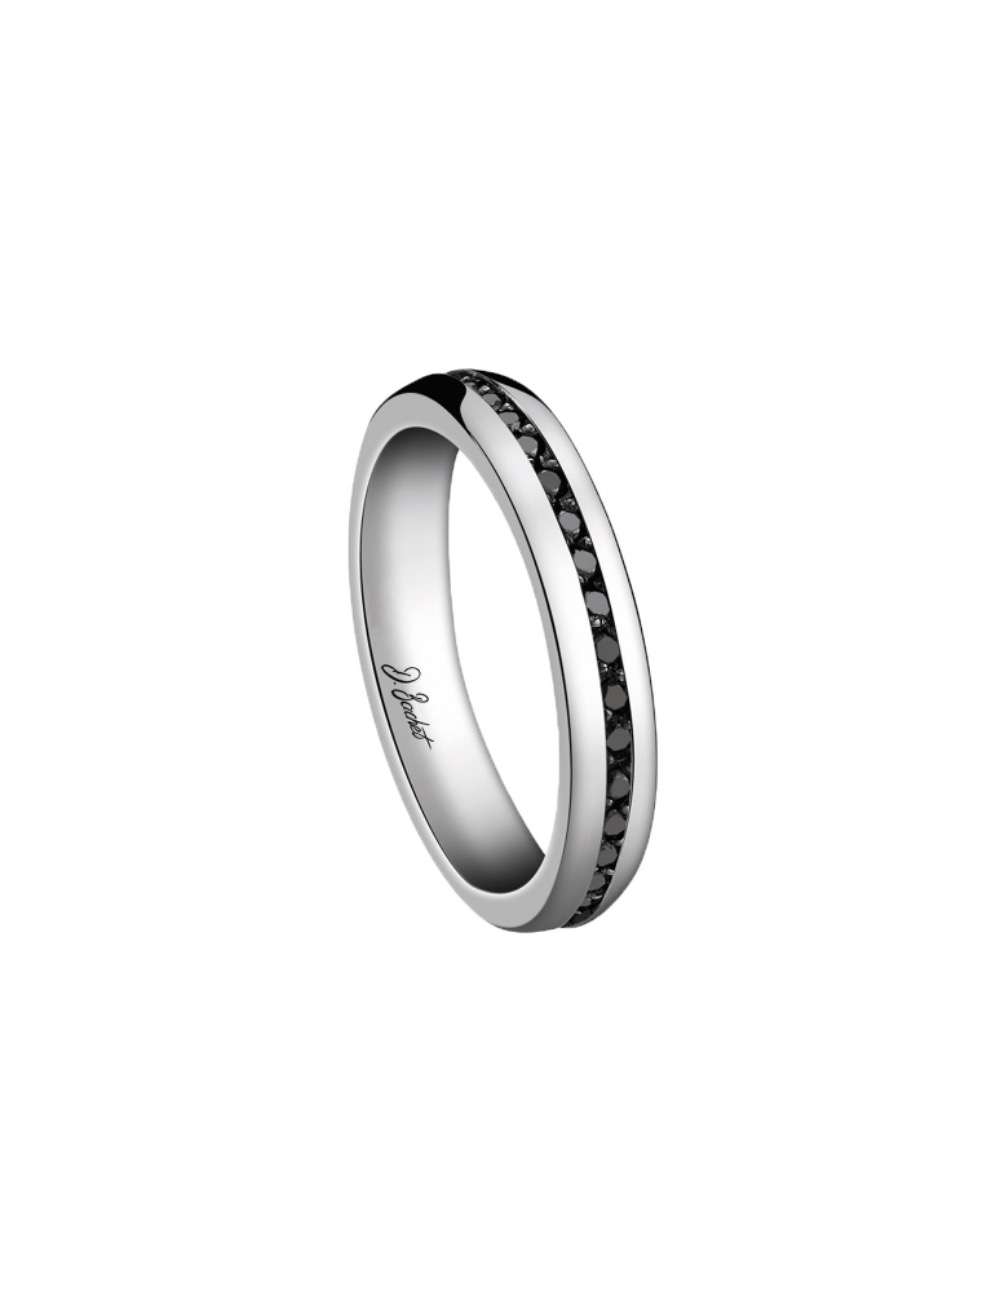 A men's wedding ring that combines tradition and modernity handset with black diamonds